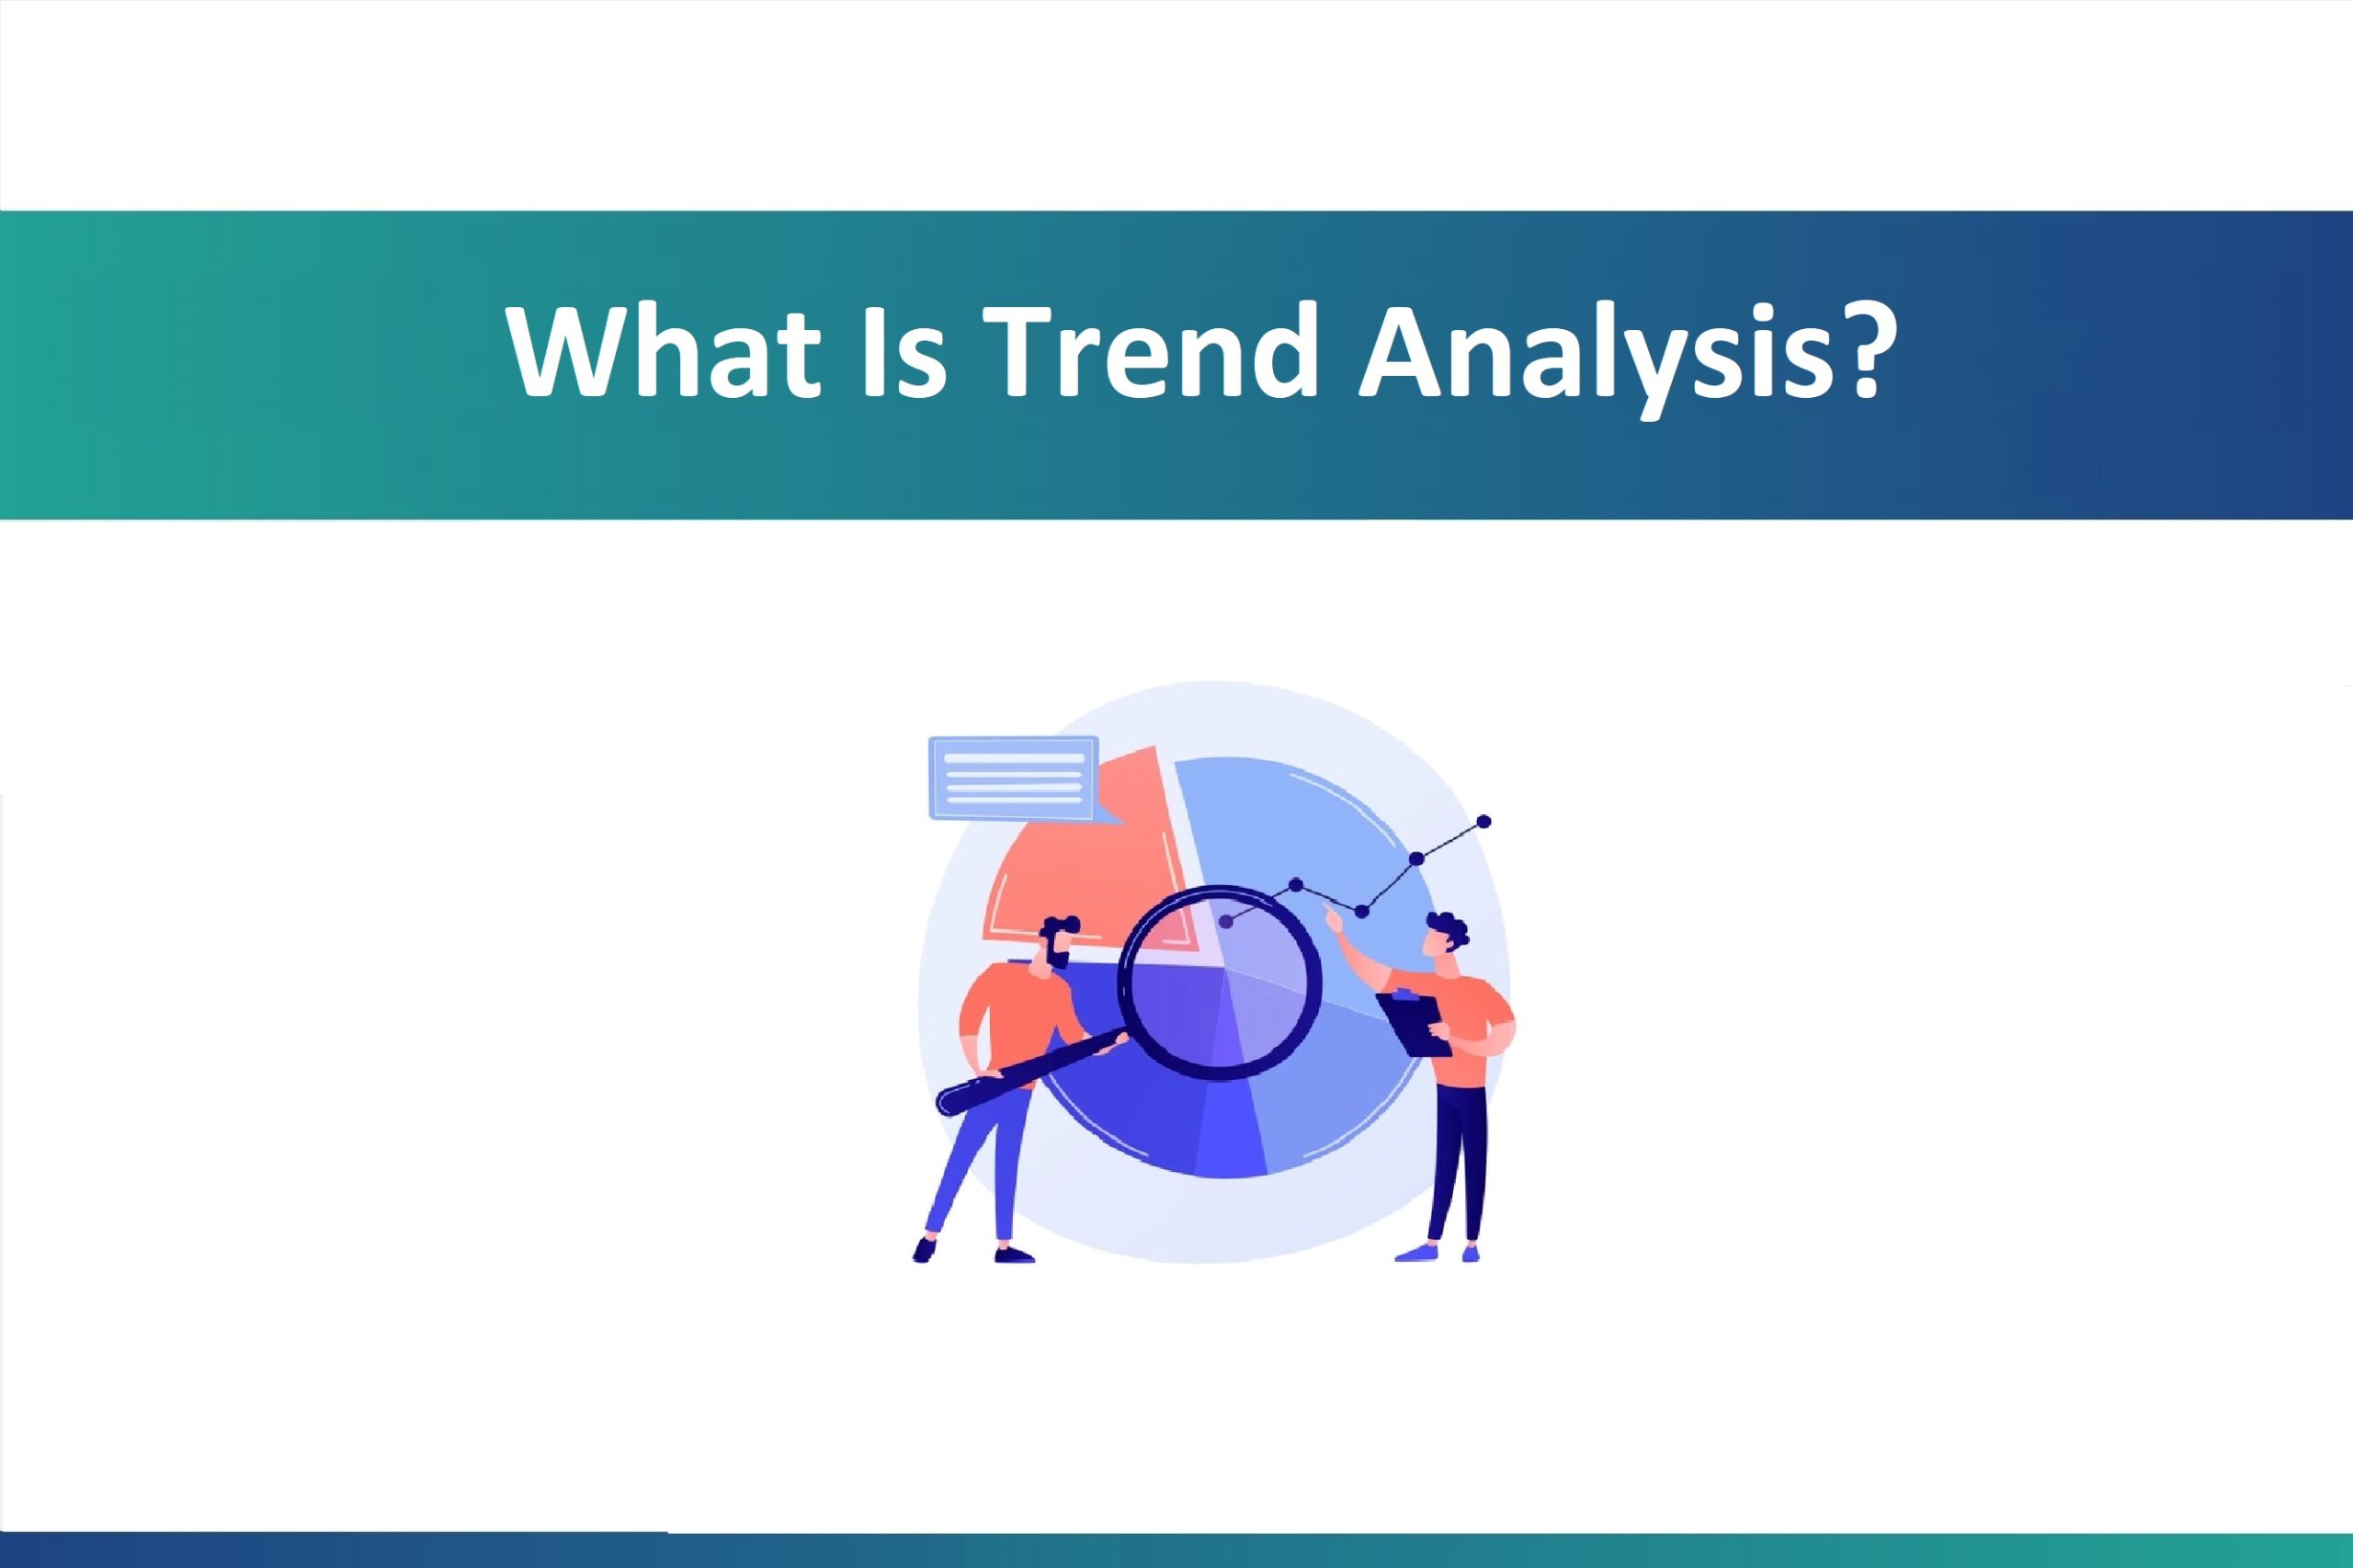 What is Trend Analysis and How Does It Impact Decision-Making?